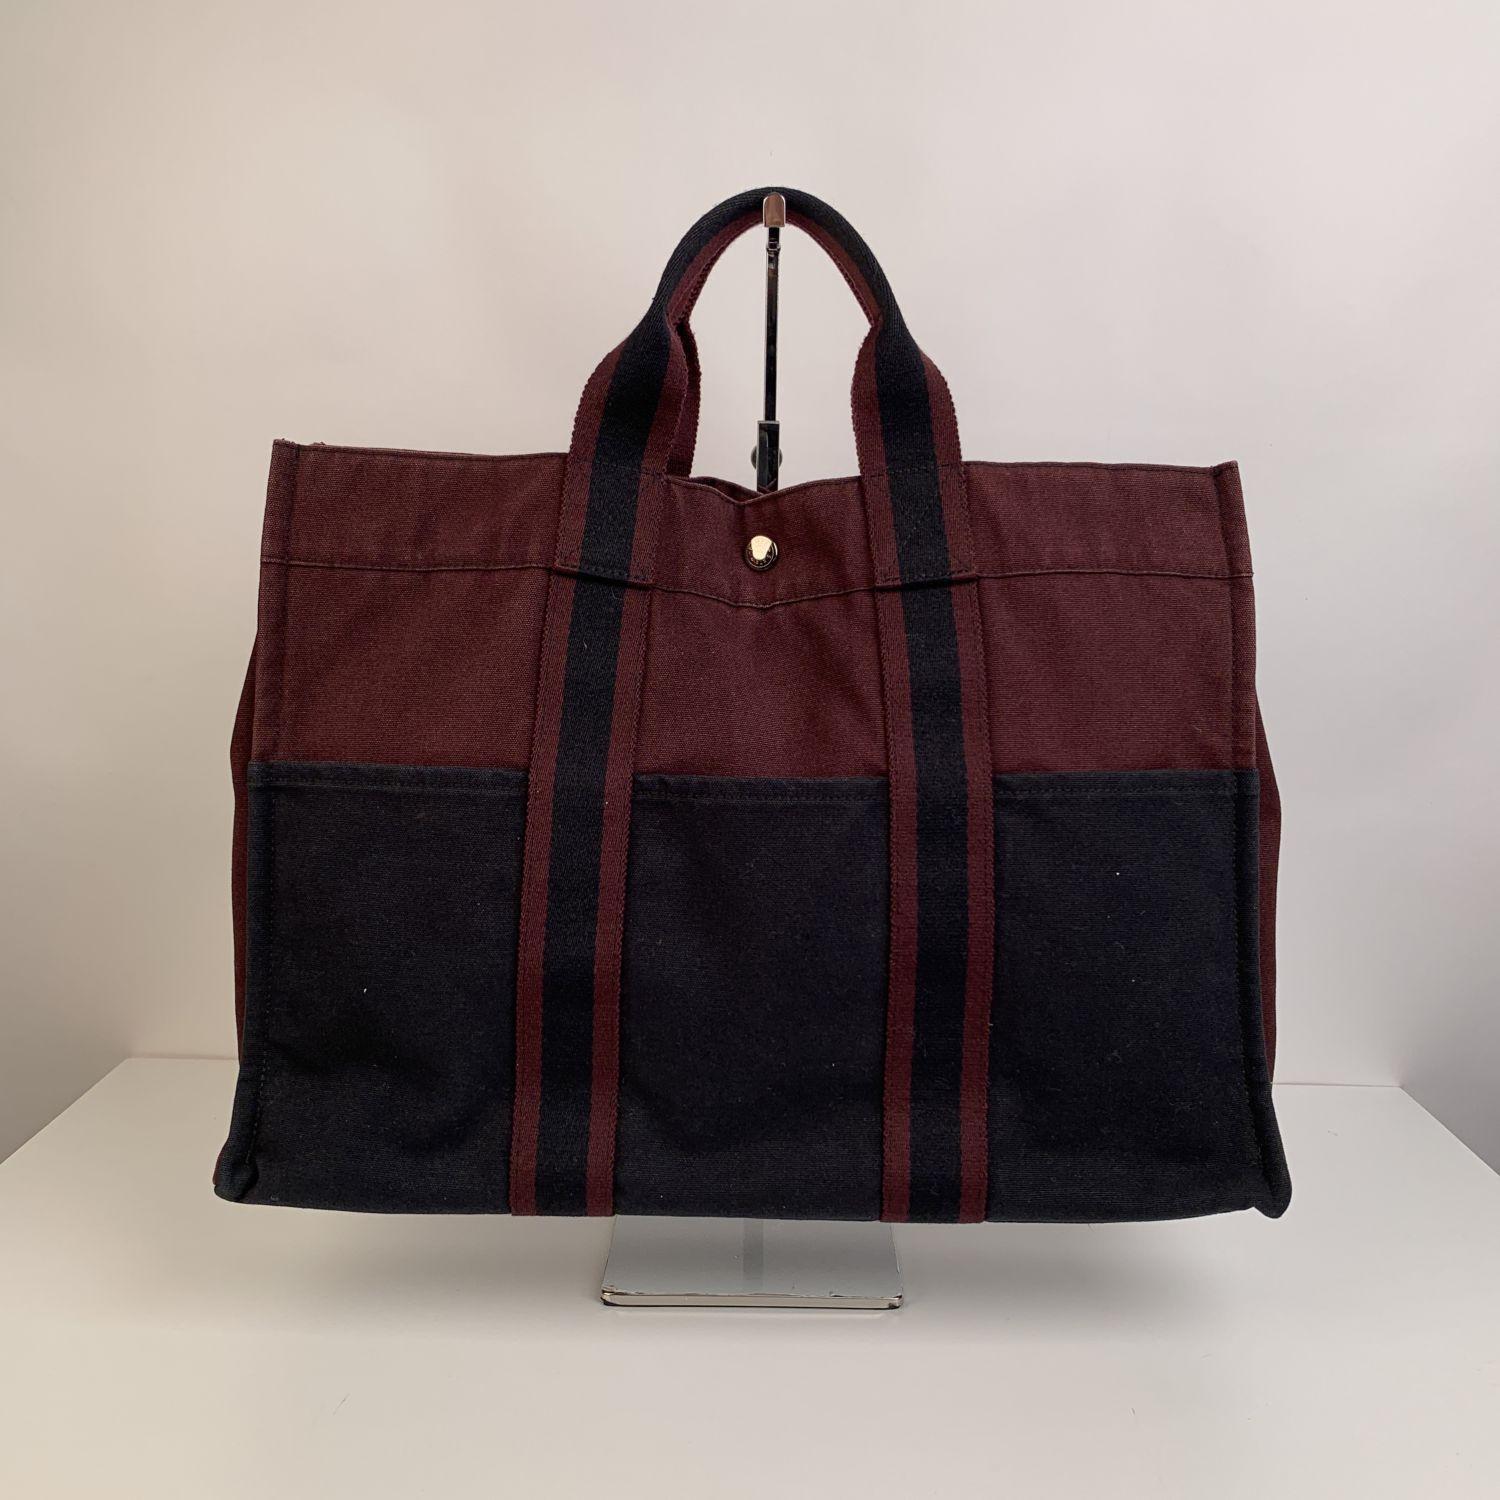 Model: 'HERMES FOURRE TOUT - MM' - Bicolor Tote handbag. Made in France, Brown and Black background with contrast stripes. Material: 100% cotton. It has snaps on both ends for expansion. Durable canvas handles, perfect for casual and everyday use.